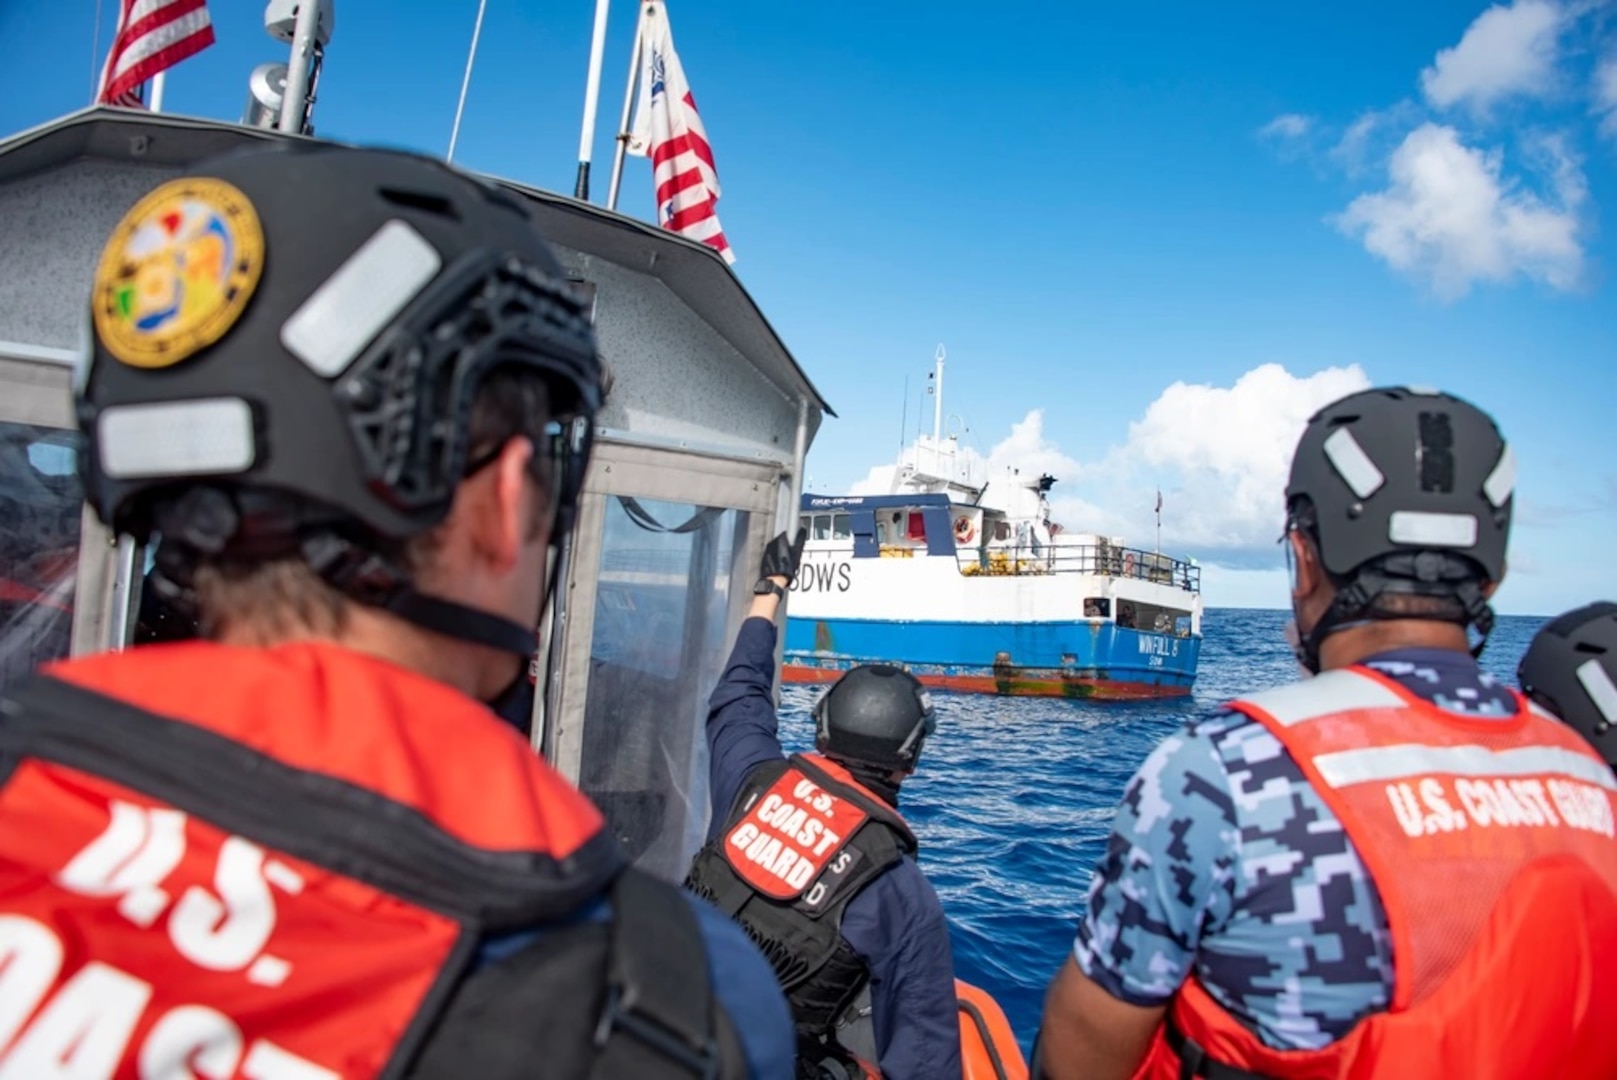 The crew of the Coast Guard Cutter Stratton conducts patrols in Fiji's exclusive economic zone with Fijian law enforcement personnel, February, 2022. The Coast Guard’s mission to combat IUU fishing is essential in protecting maritime governance and a rules-based international order to ensure a free and open Indo-Pacific. (U.S. Coast Guard photo courtesy of the Coast Guard Cutter Stratton)